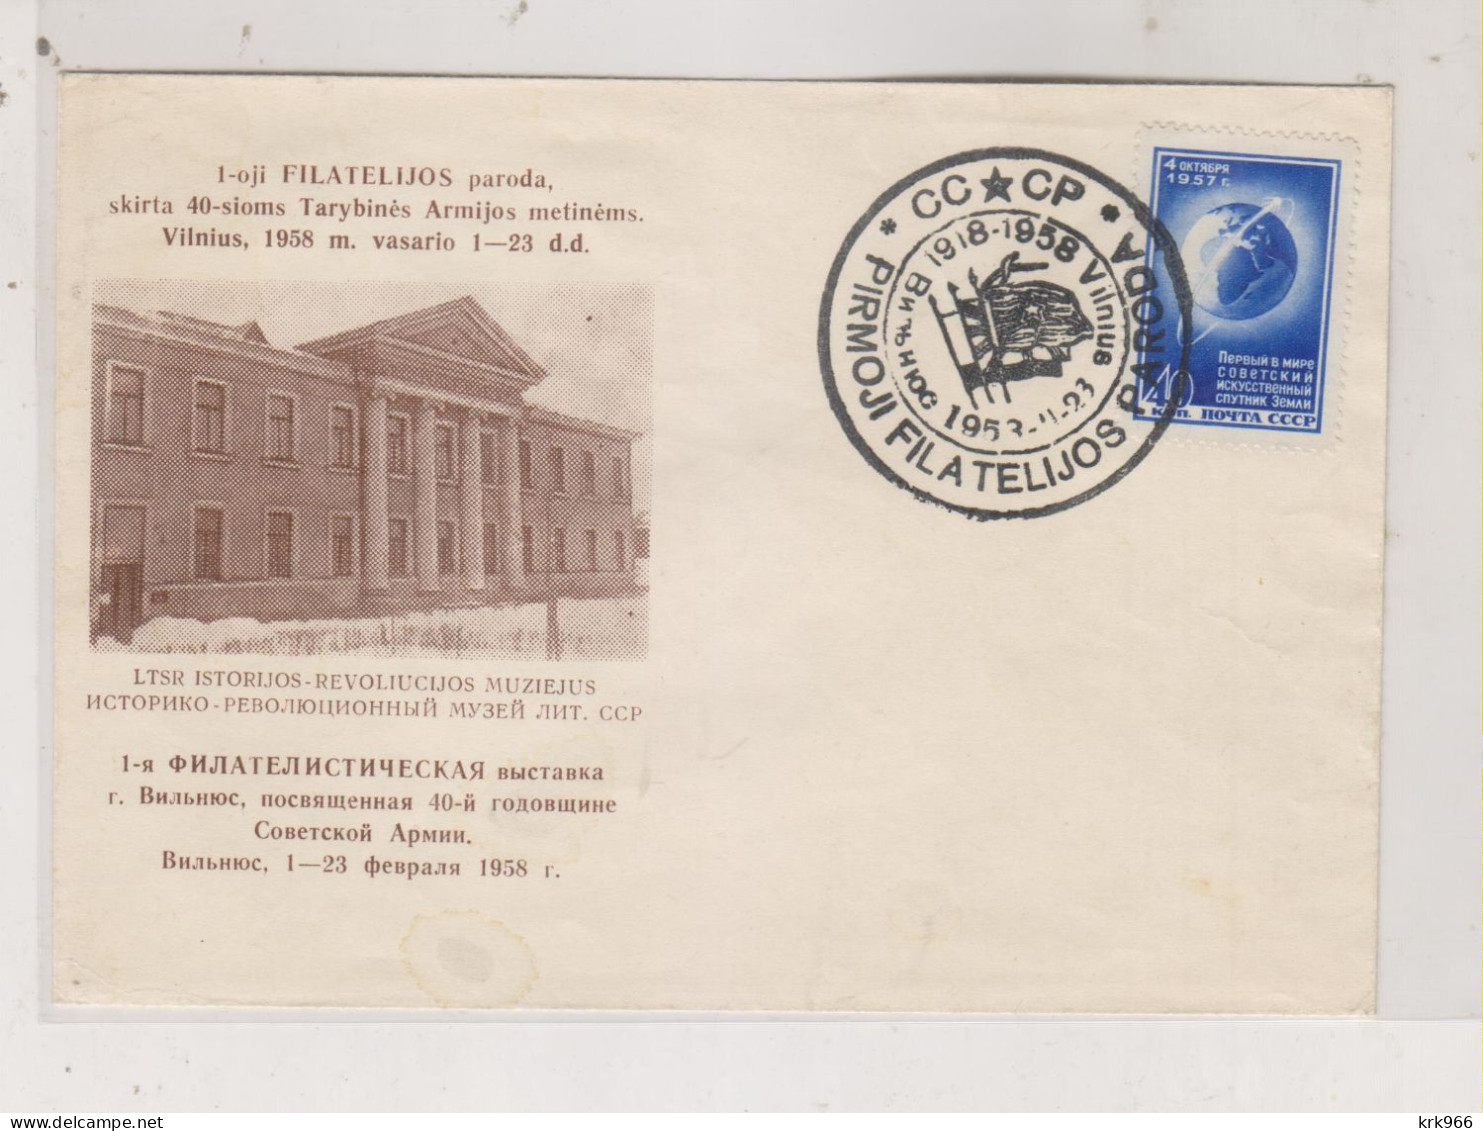 RUSSIA, 1958 VILNIUS Nice Cover - Covers & Documents